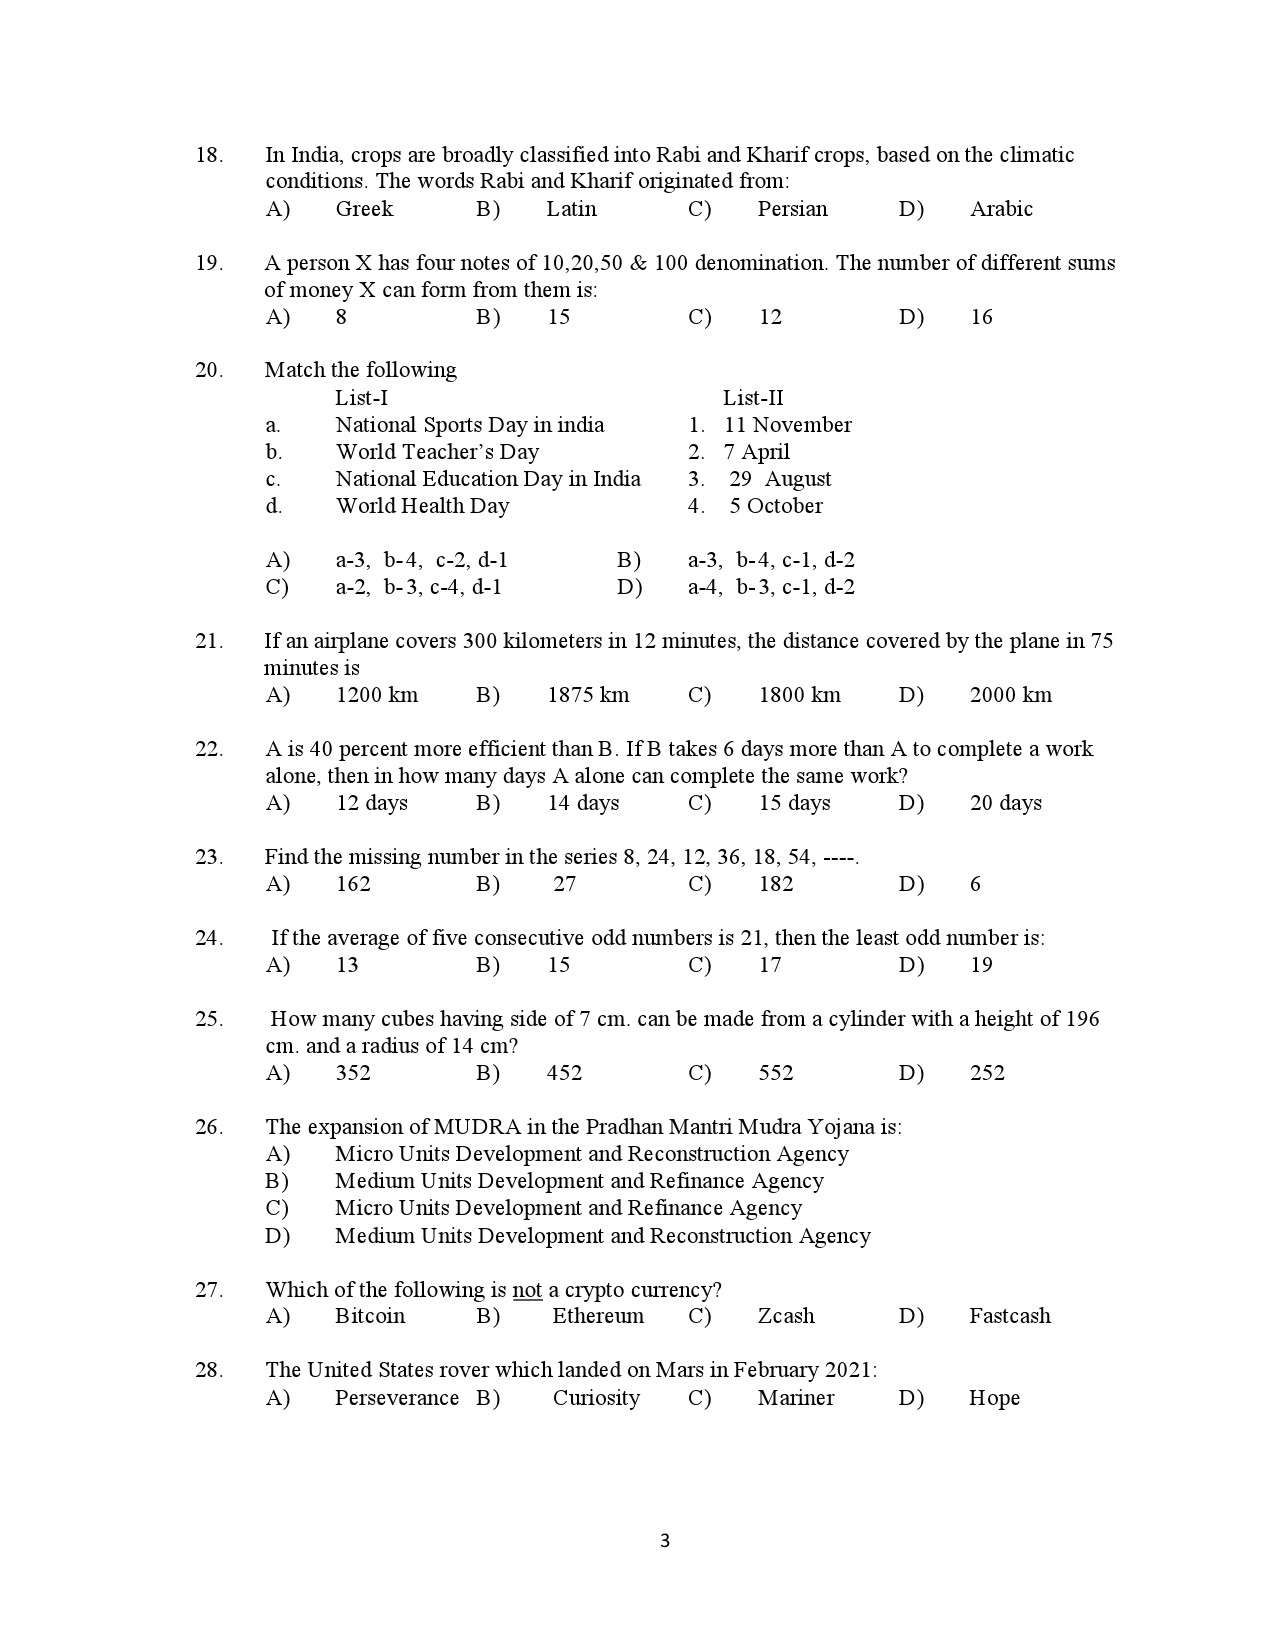 Kerala SET General Knowledge Exam Question Paper July 2021 3